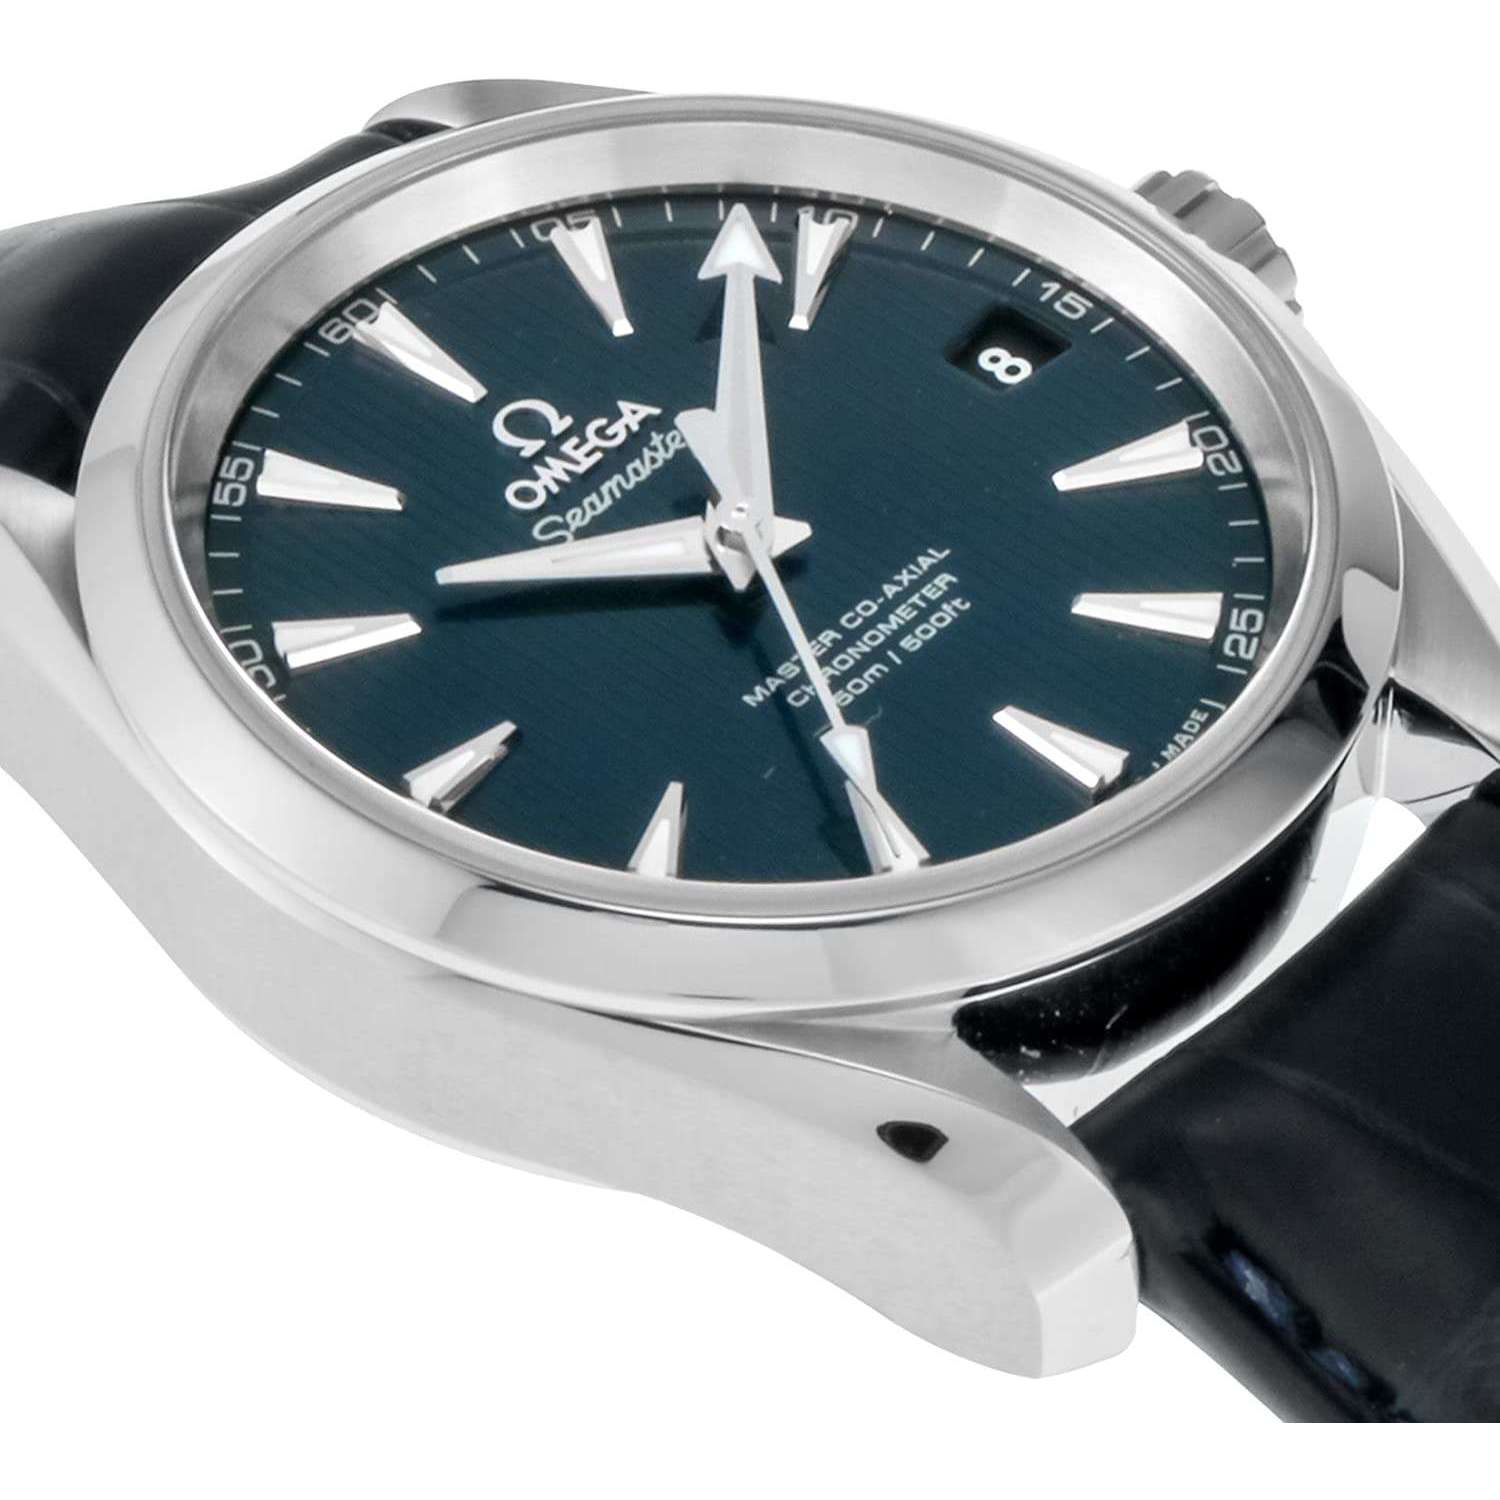 ROOK JAPAN:OMEGA SEAMASTER MASTER CO-AXIAL CHRONOMETER 39 MM MEN WATCH 231.13.39.21.03.001,Luxury Watch,Omega